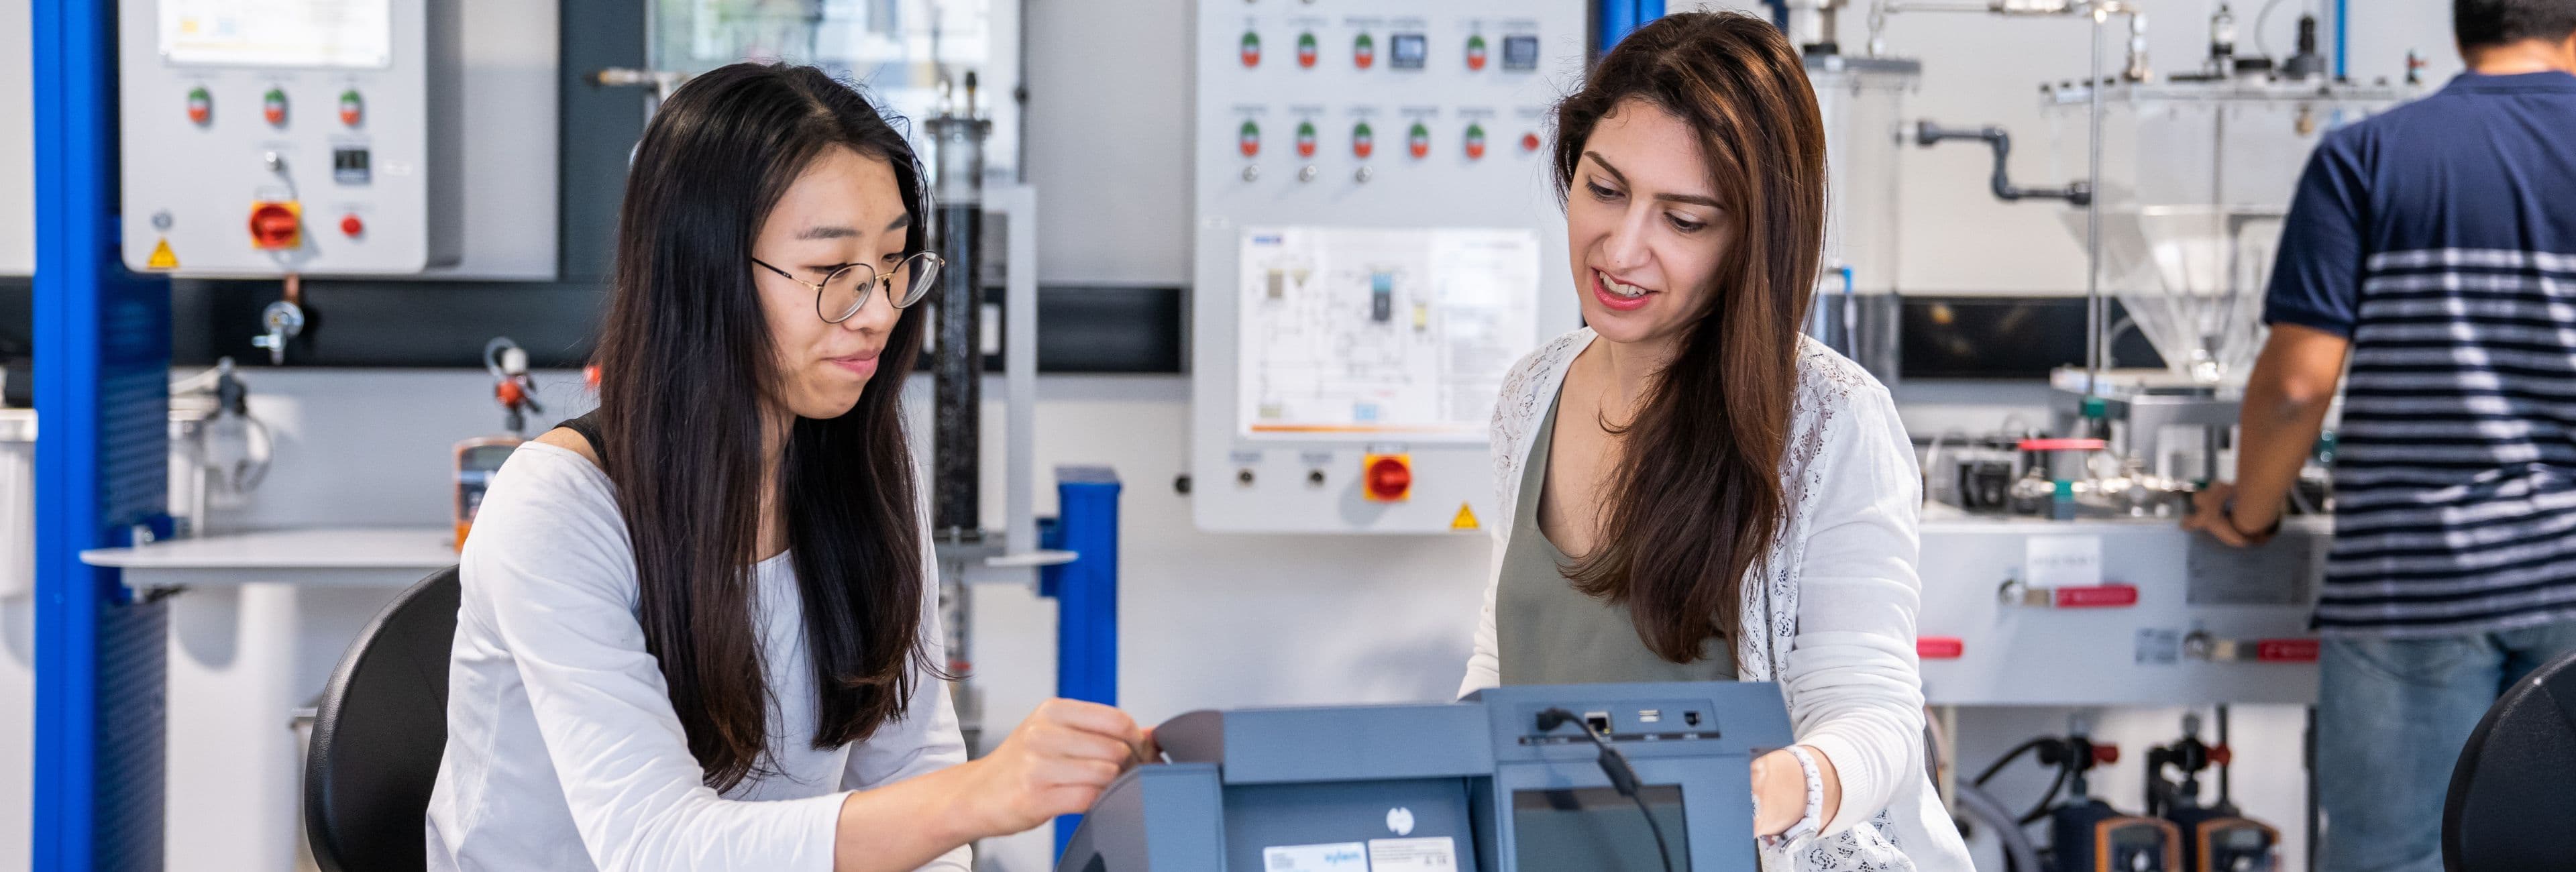 Two students working in an engineering lab.